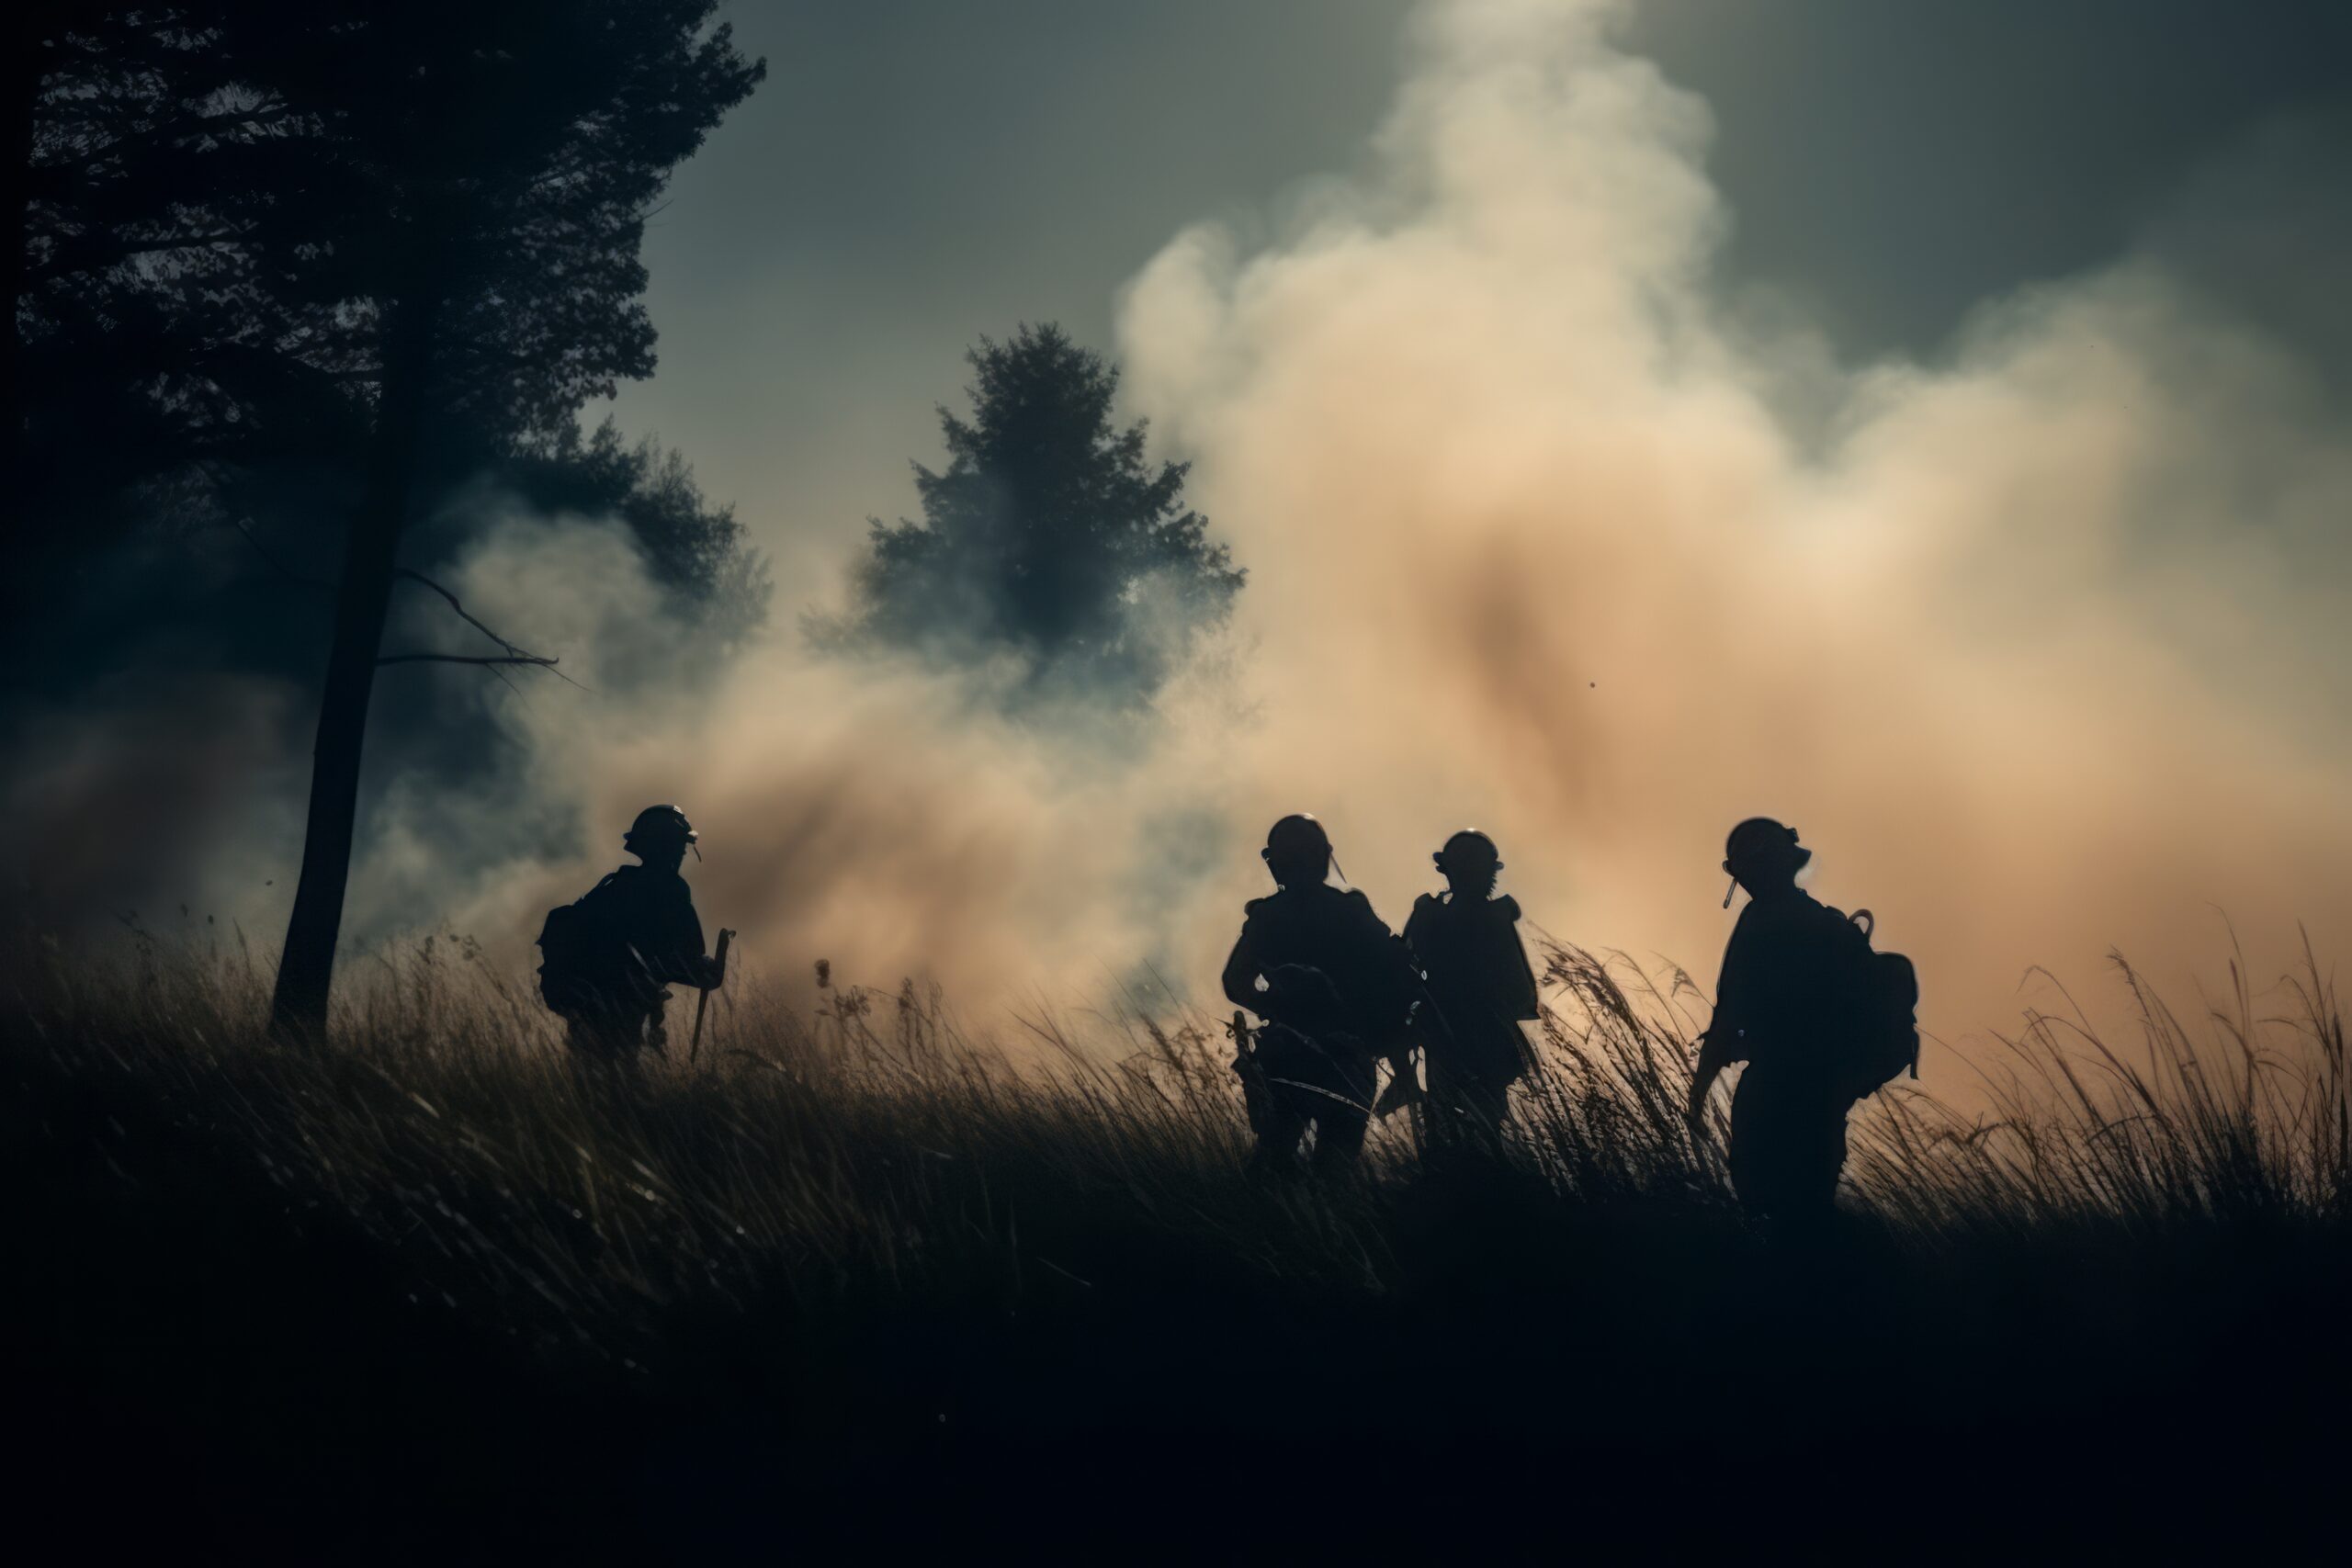 Four firefighters silhouetted by the smoke of a burning forest fire.